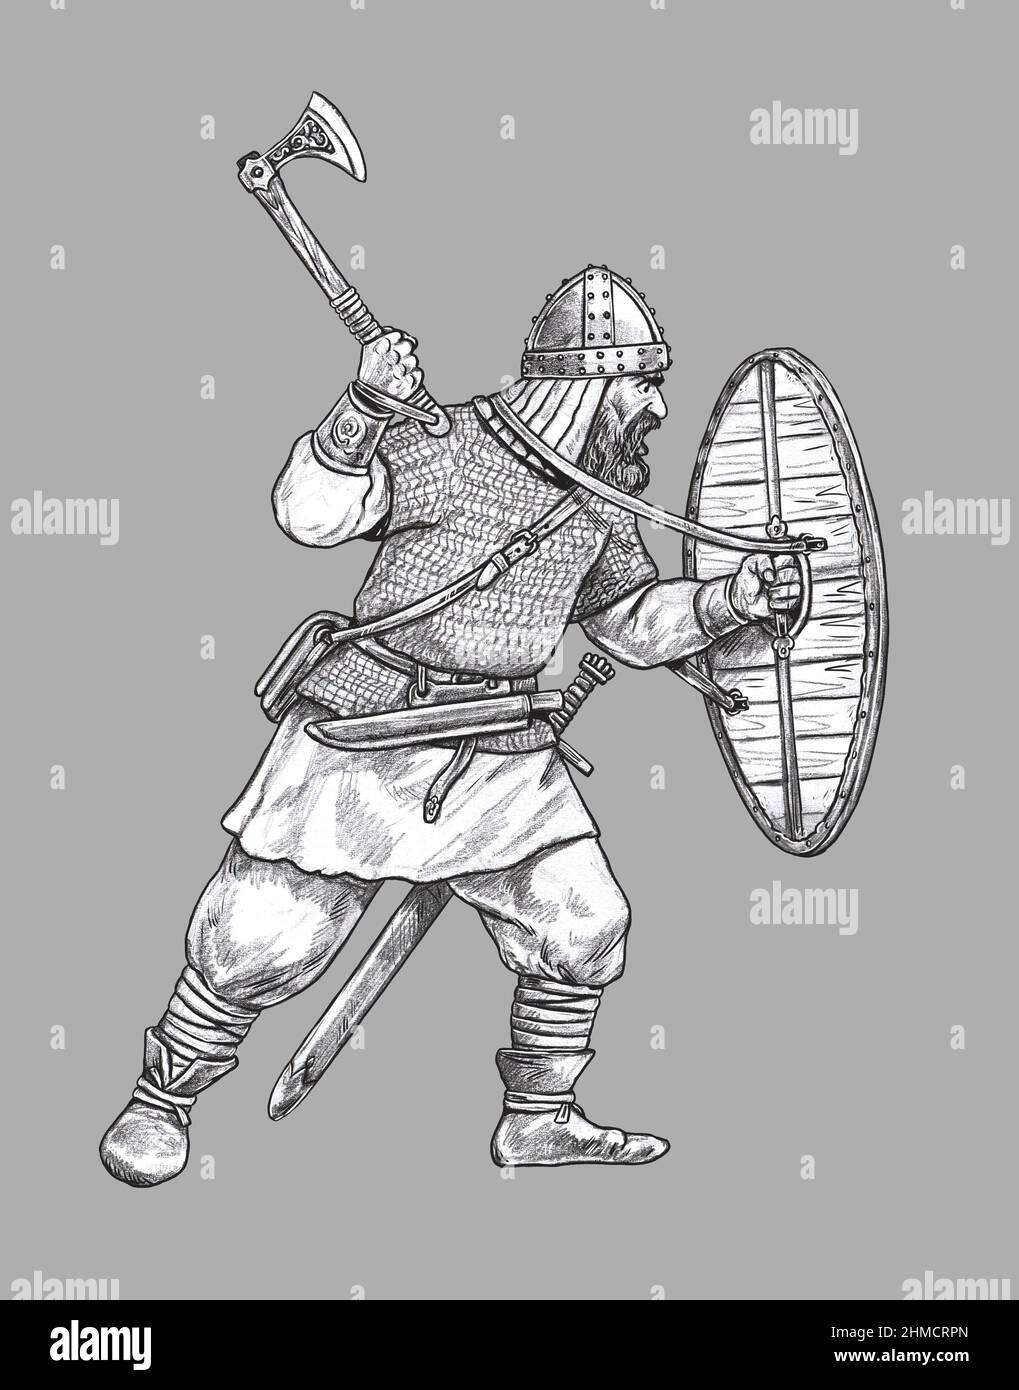 Viking with ax. Norman warrior in battle. Medieval knight illustration ...